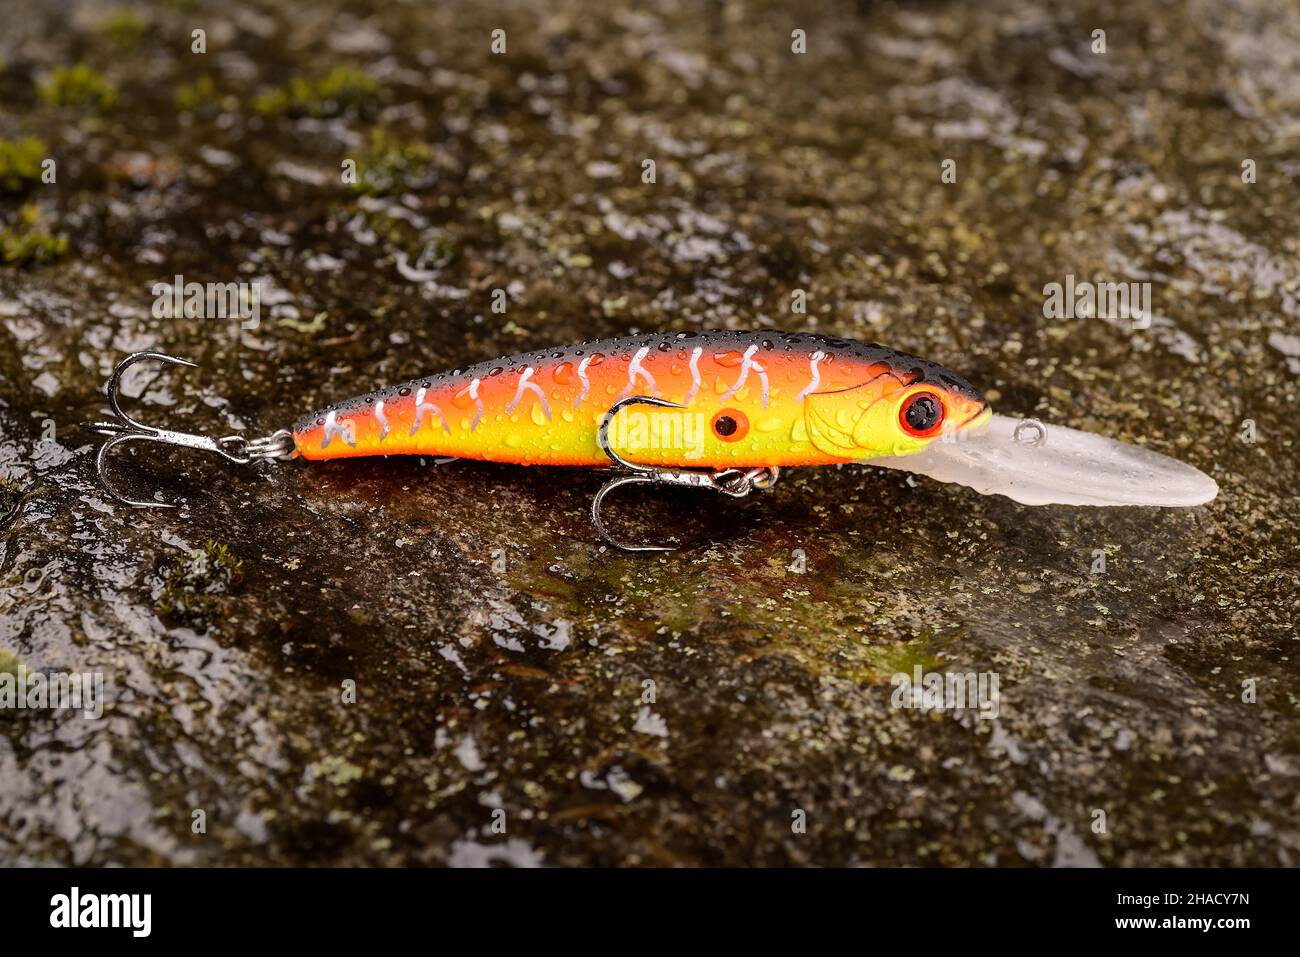 Freshwater Pike with Fishing Lure in Mouth and Fishing Equipment Stock  Photo - Image of adventure, lake: 113160906